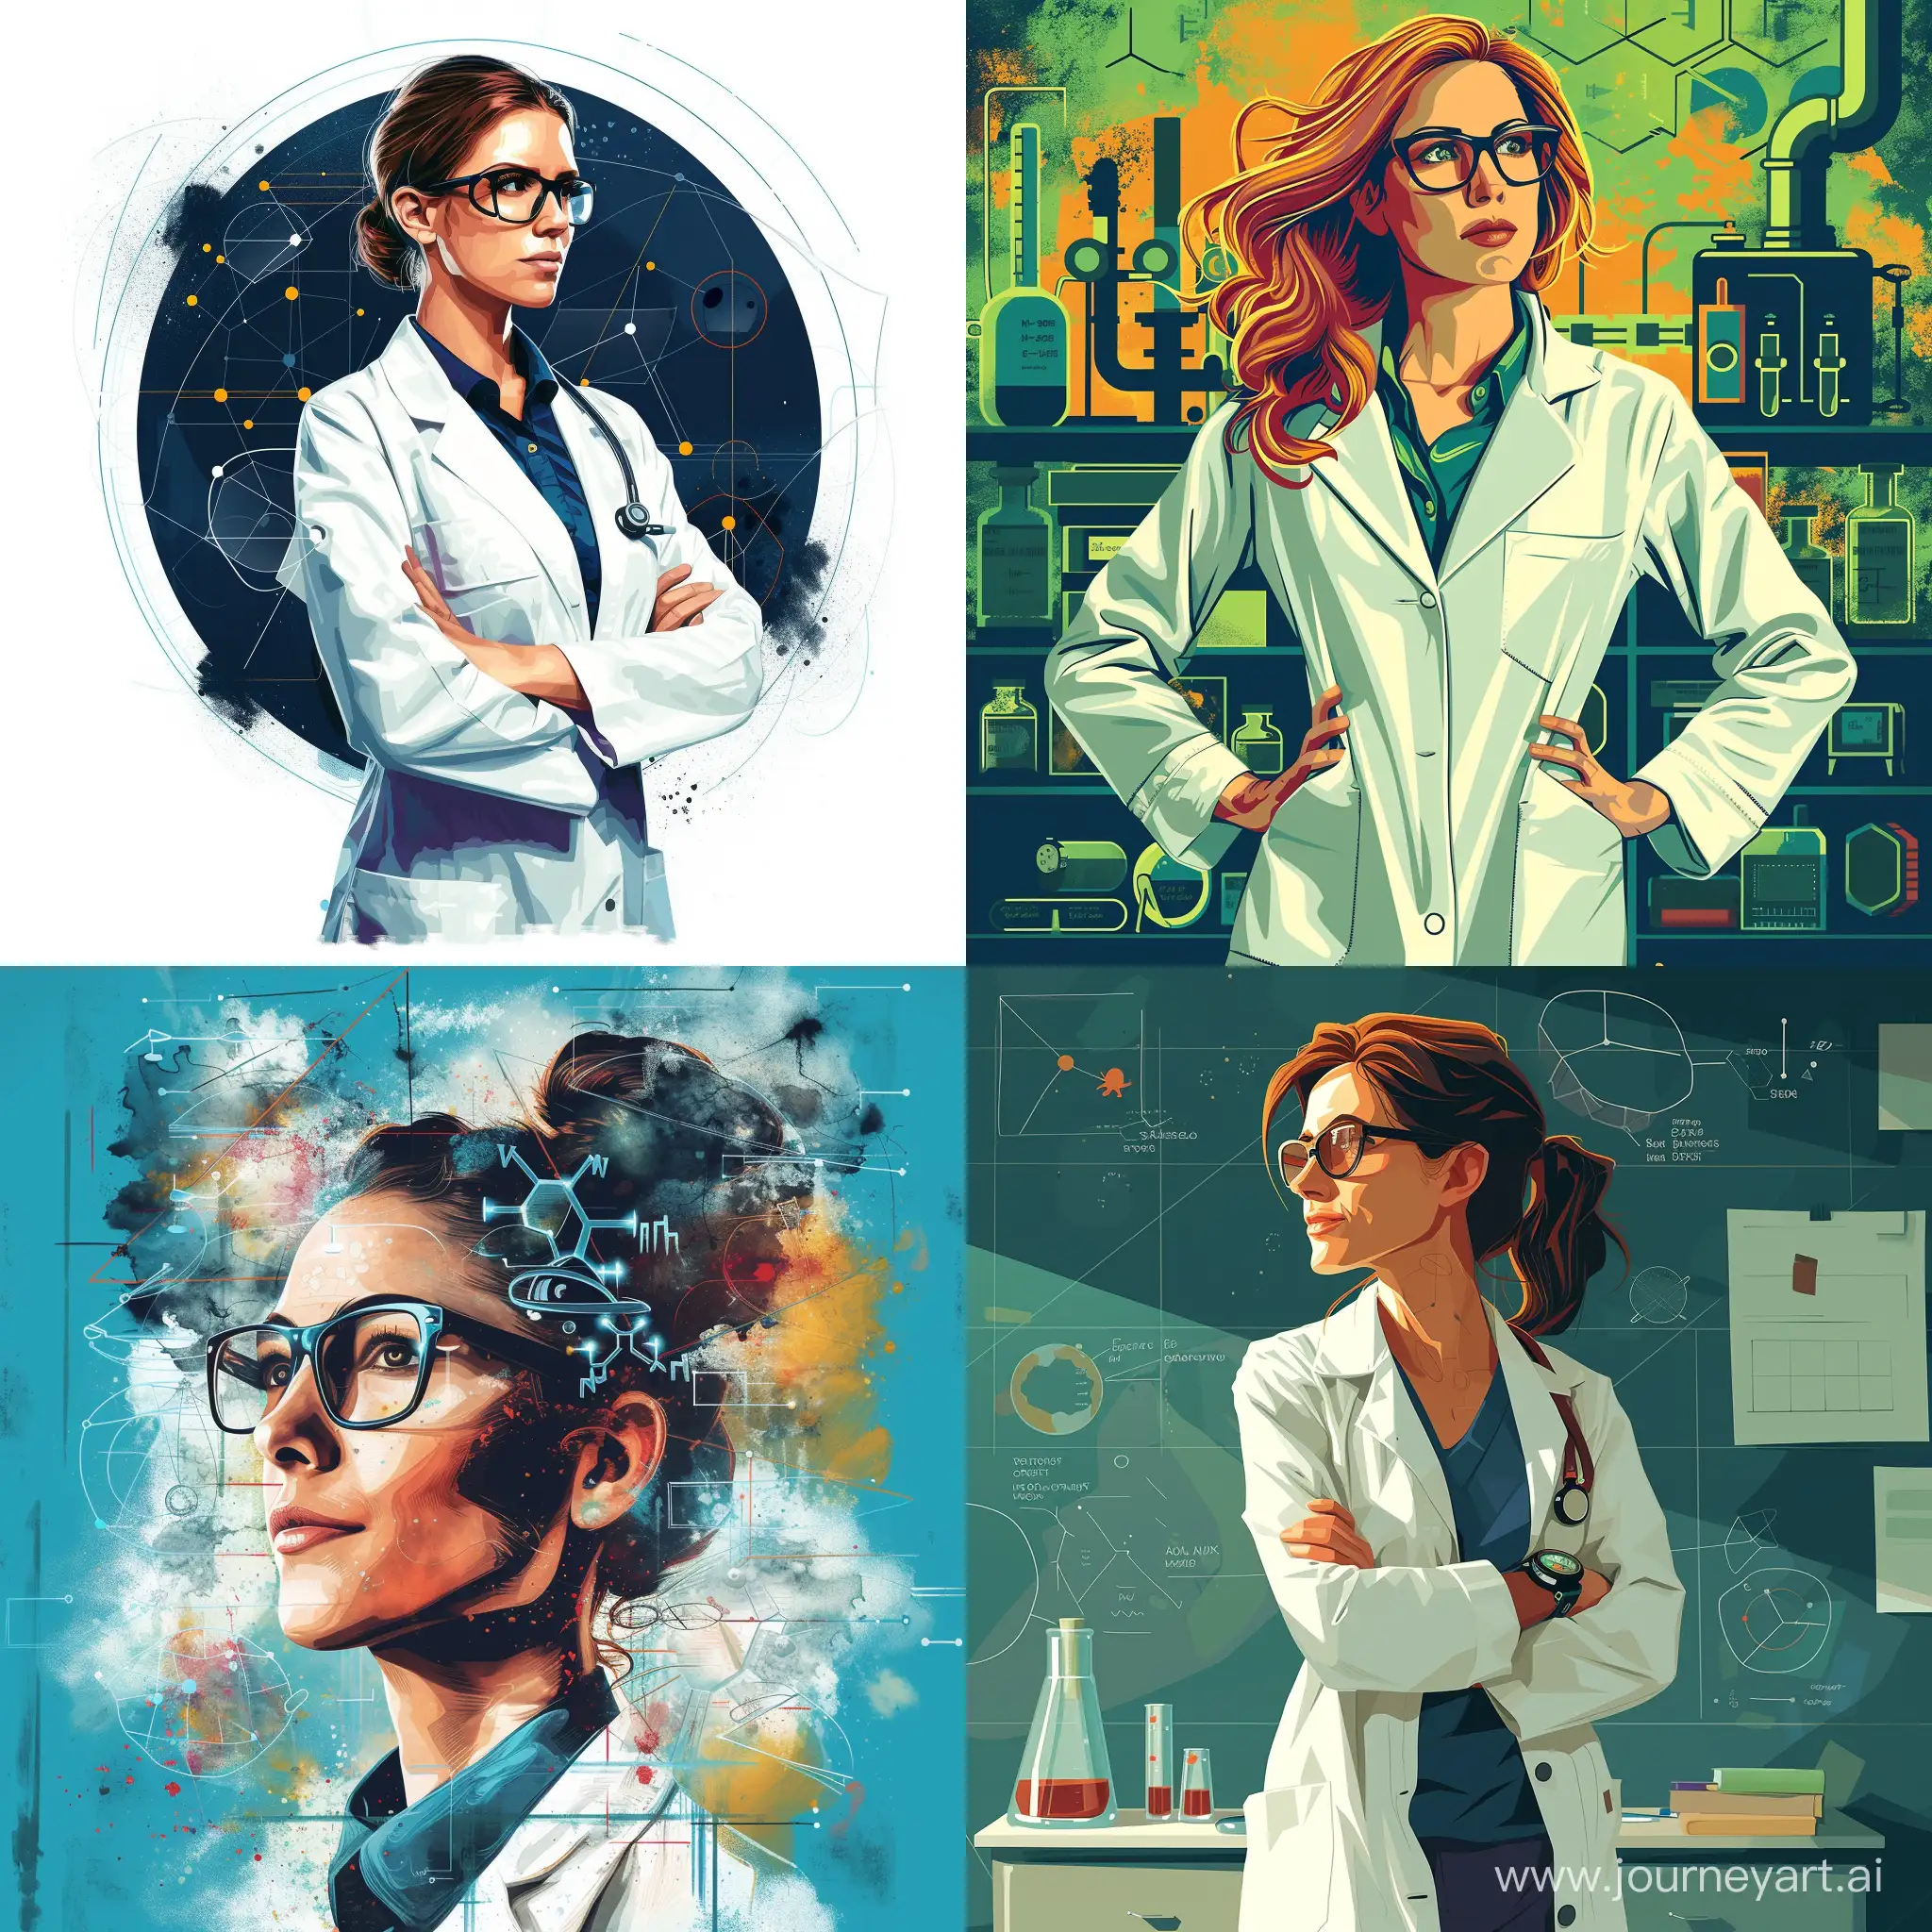 GENERATE A POSTER OF A SCIENTISTS WOMAN
